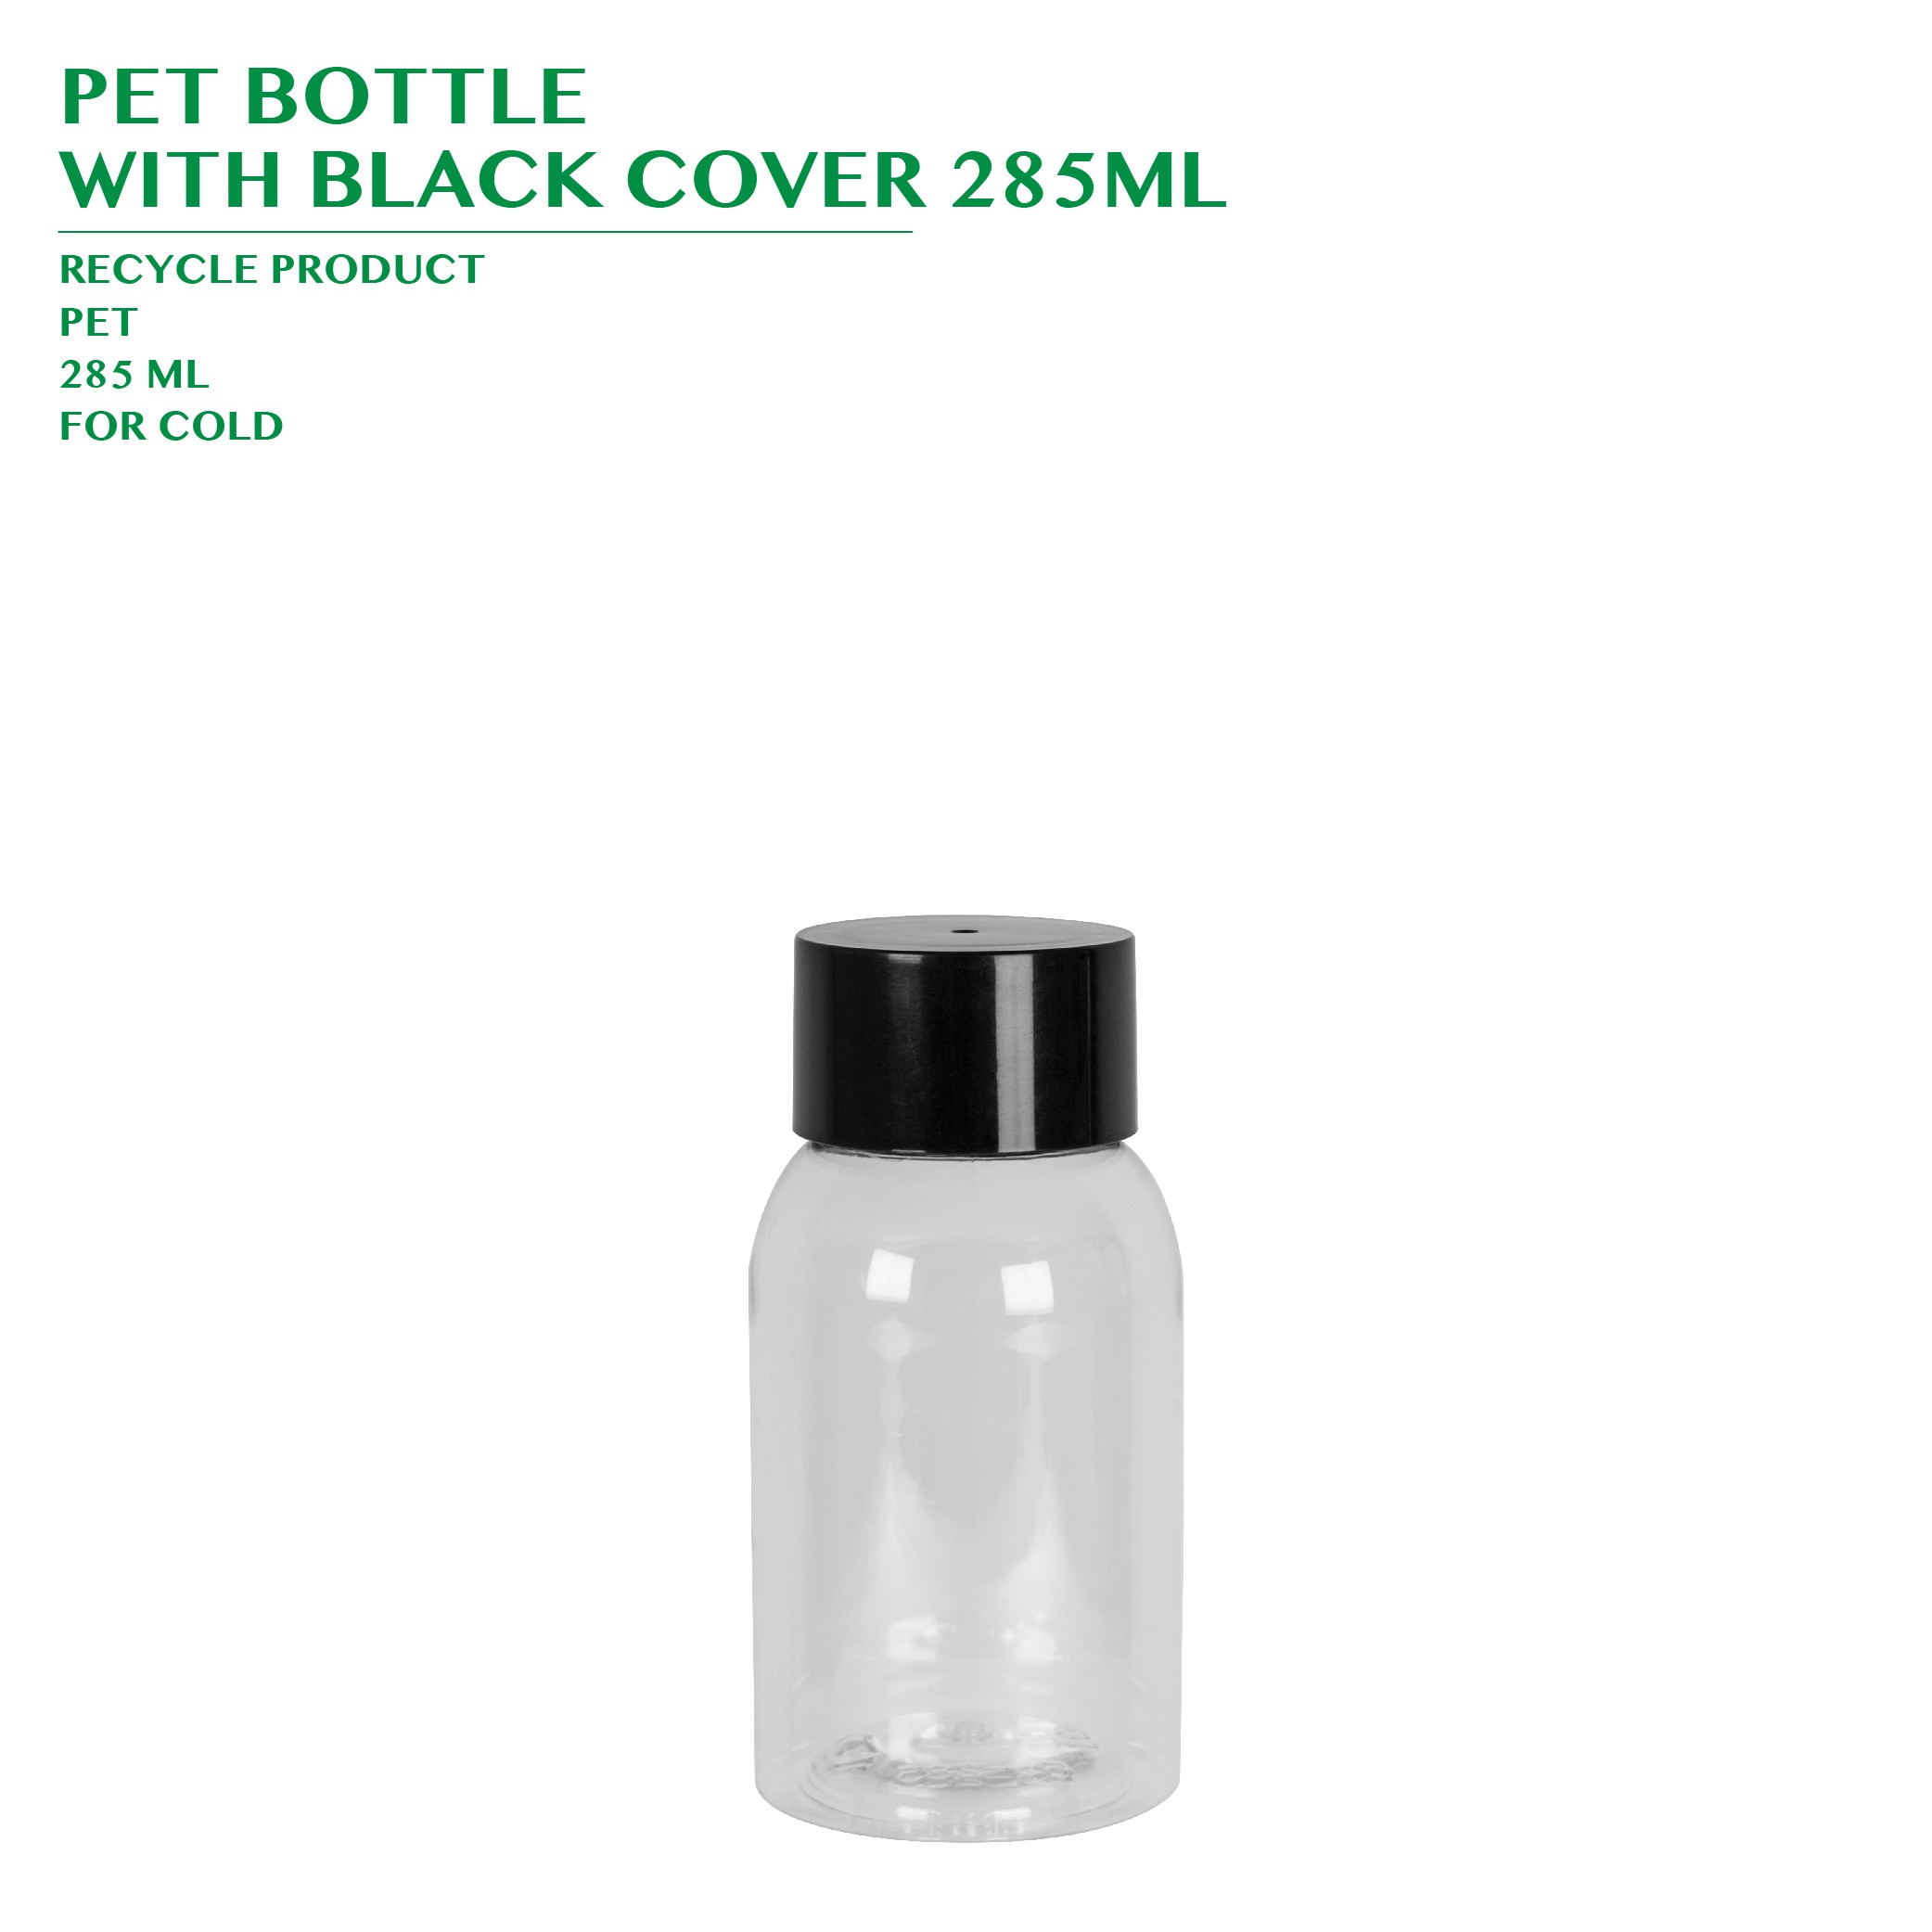 PRE-ORDER PET BOTTLE  WITH BLACK COVER 285ML